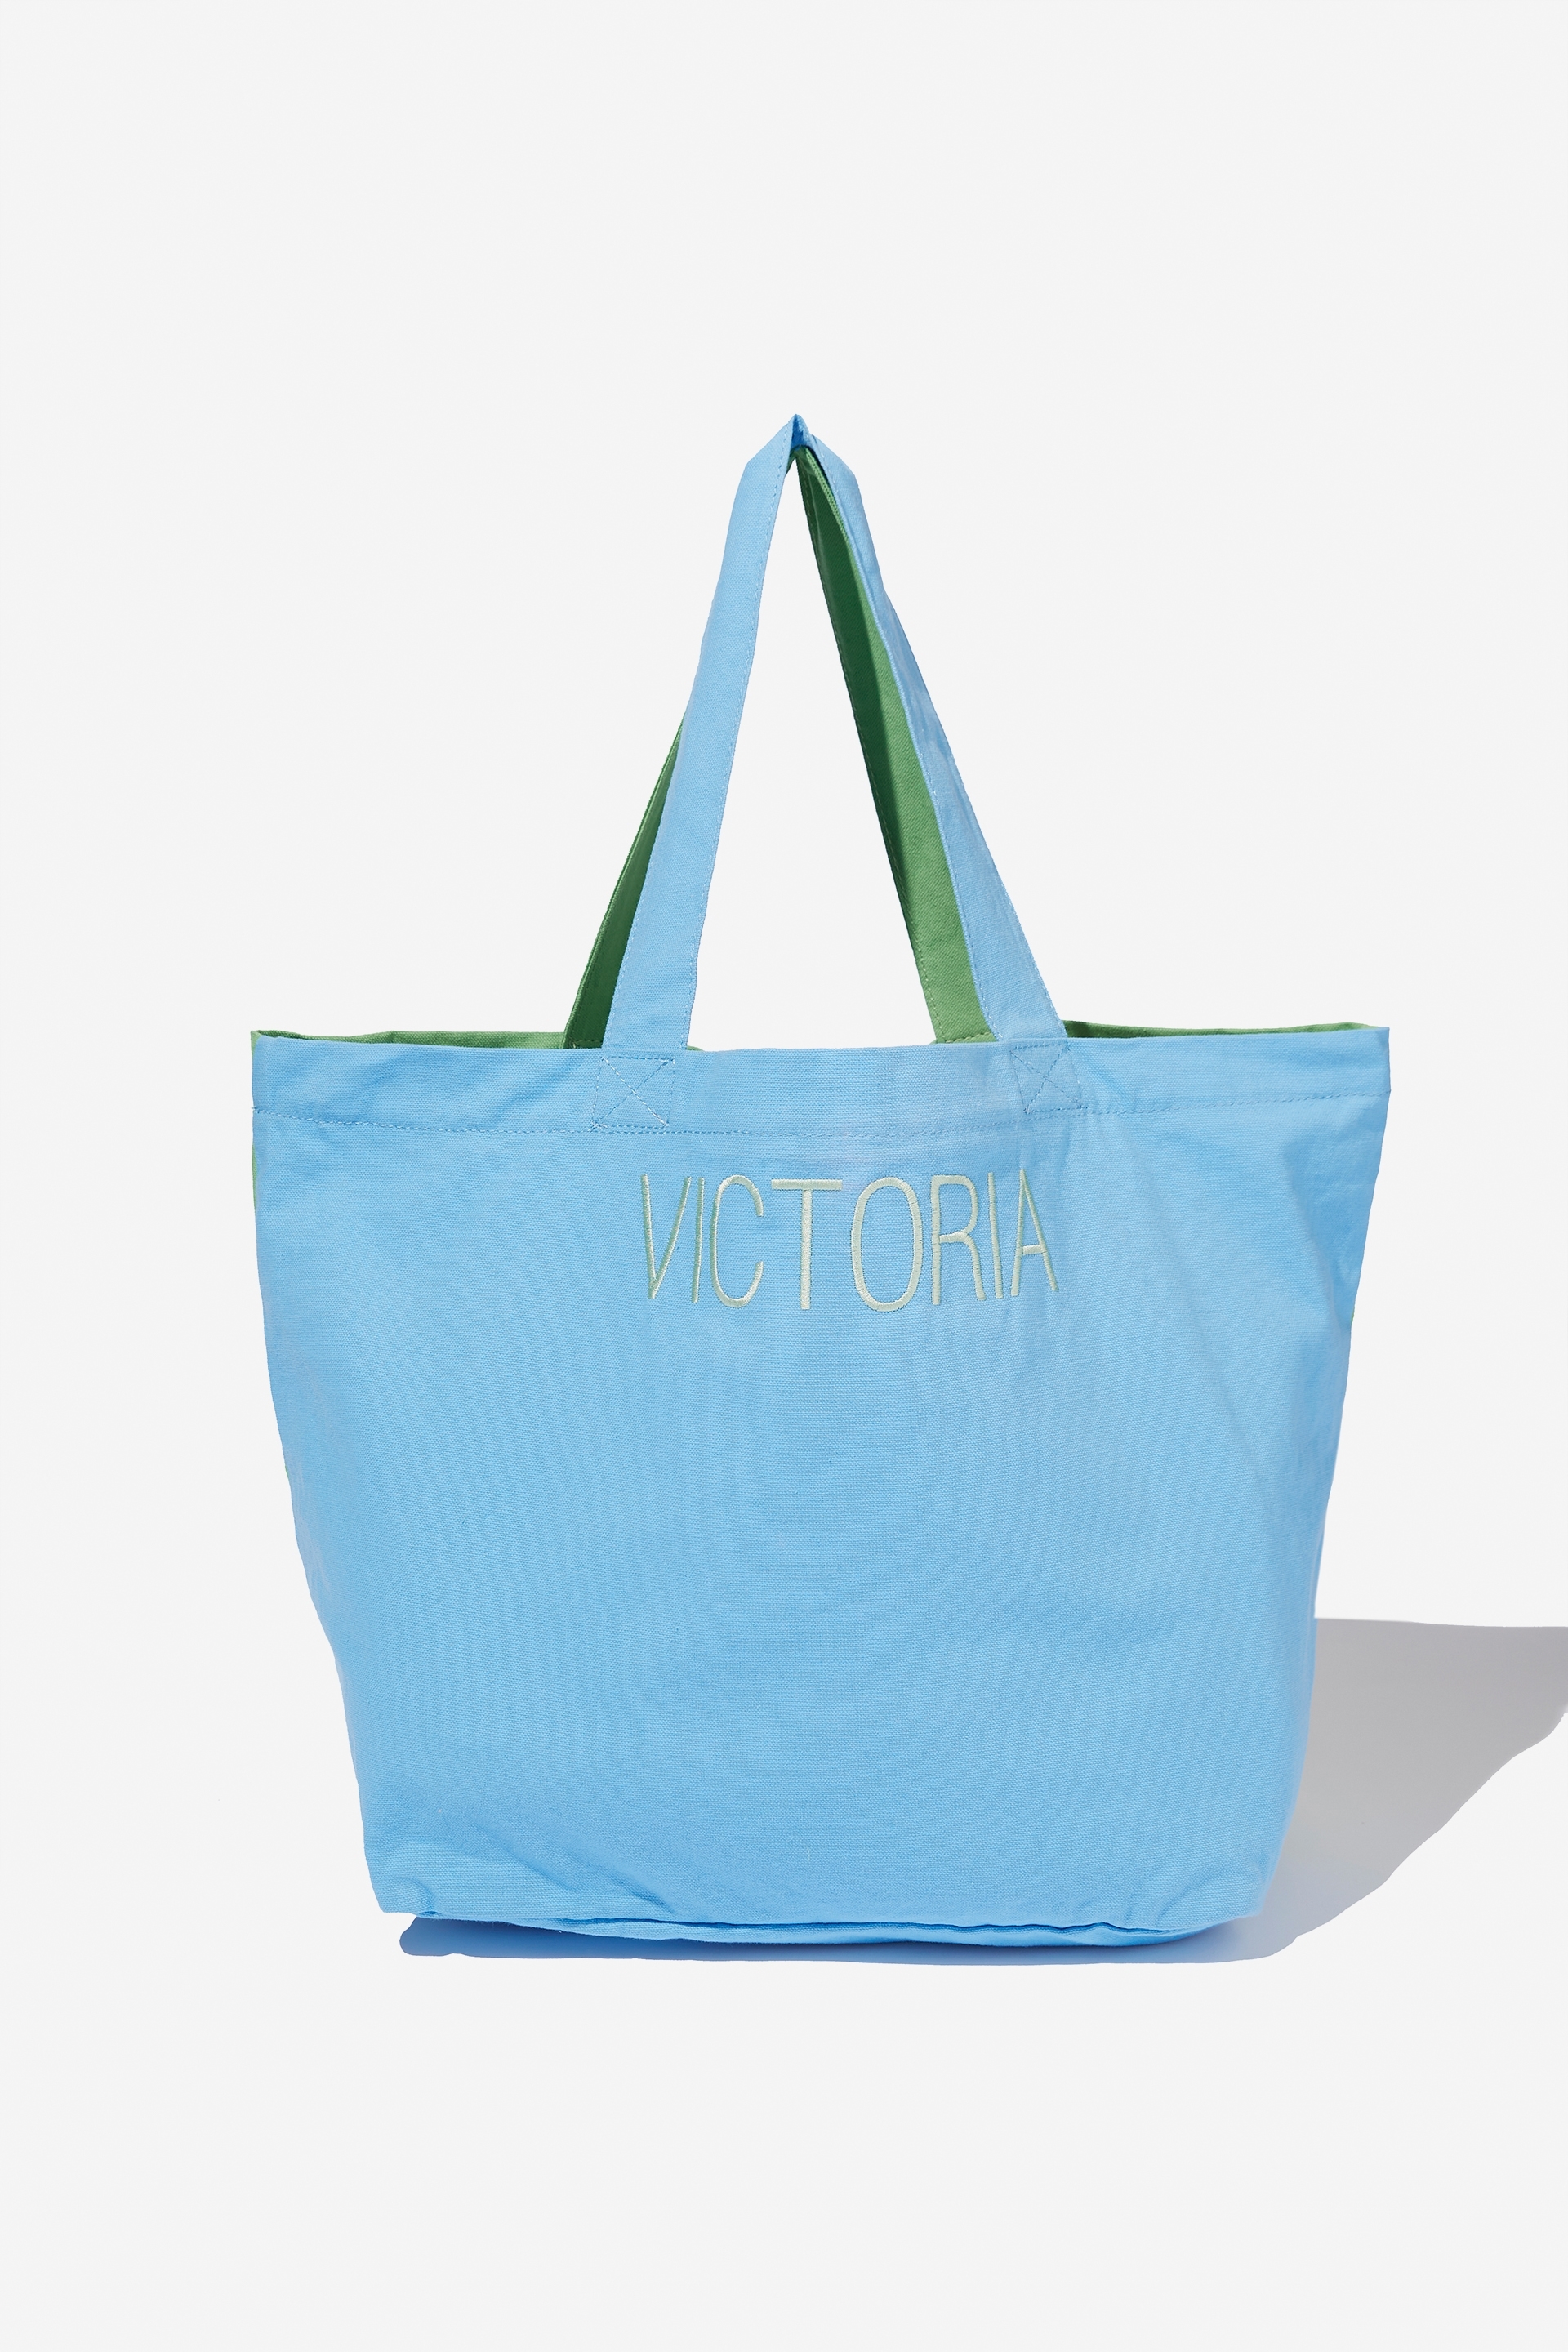 Rubi - Personalised Everyday Canvas Tote - Blue/green